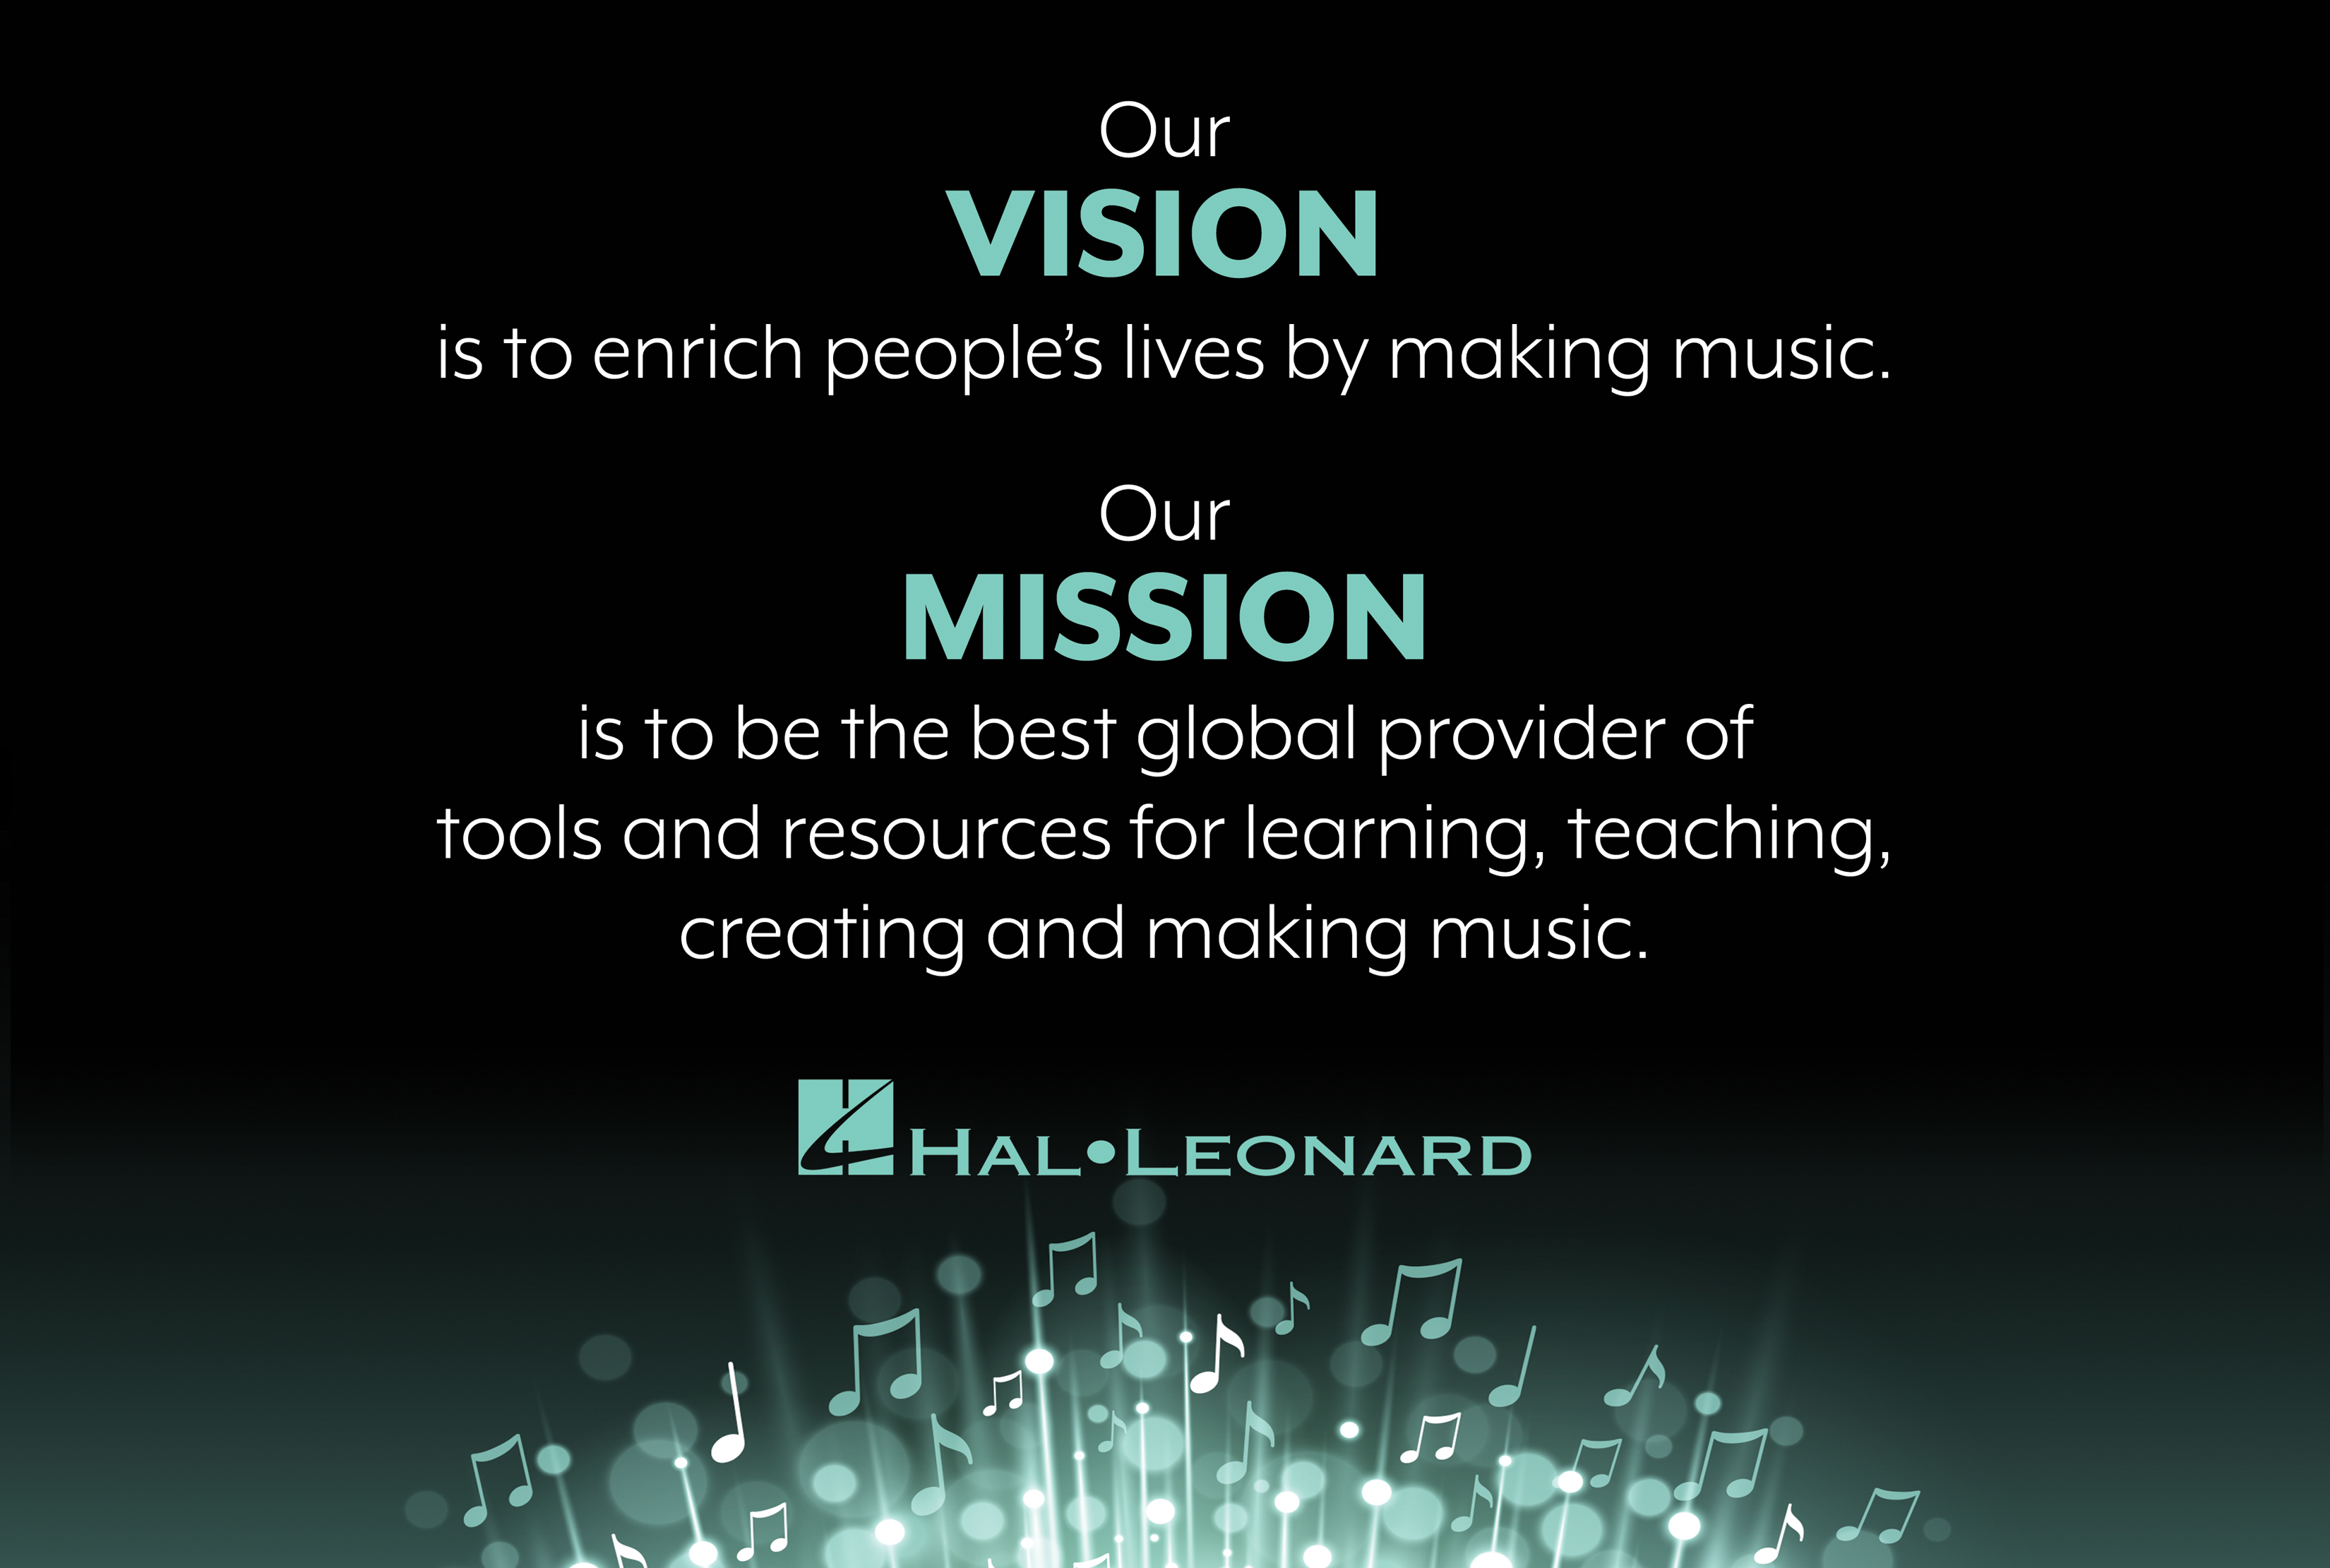 Our Vision is to enrich people's lives by making music. Our Mission is to be the best global provider of tools and resources for learning, teaching, creating and making music.